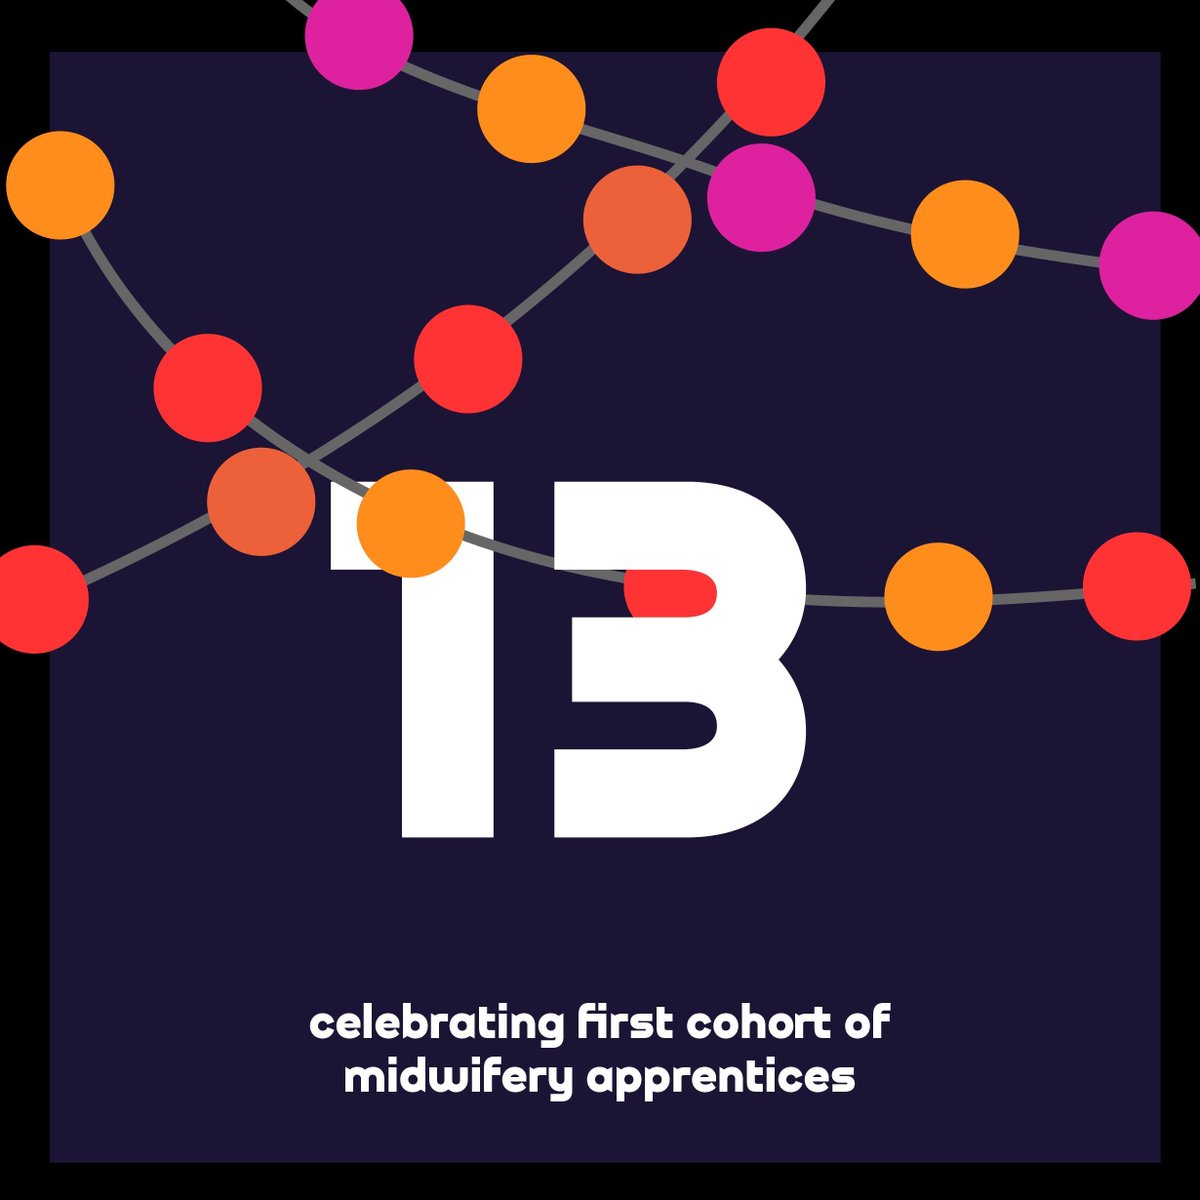 It was a brilliant moment to celebrate the graduation of the first cohort of midwifery apprentices this year. We’re dedicating number 13 in our advent calendar to the shining stars who have joined the workforce. More here: buff.ly/3EQBxHi